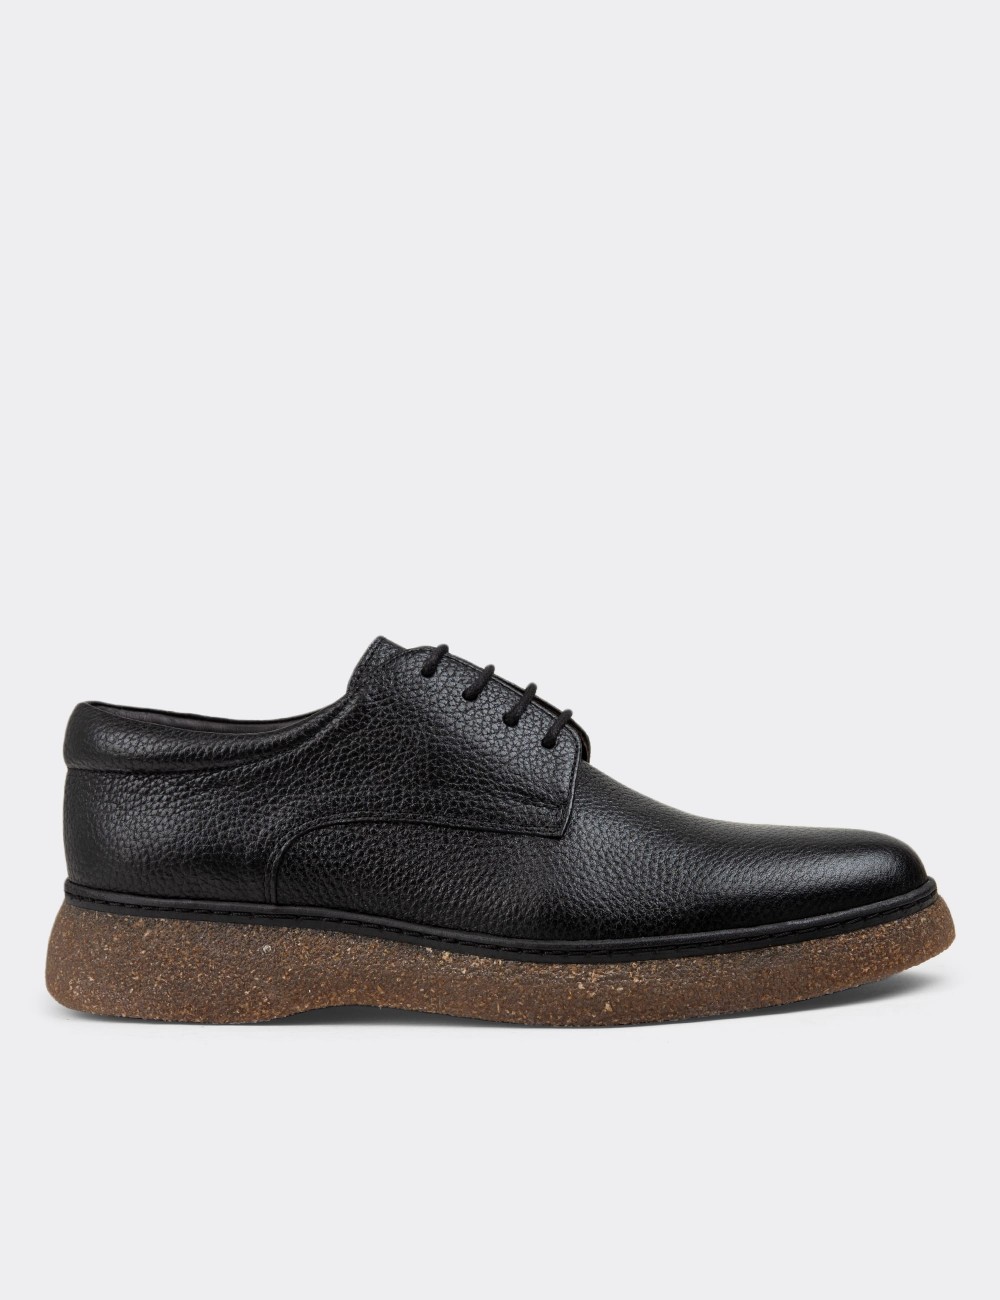 Black Leather Lace-up Shoes - 01934MSYHC02